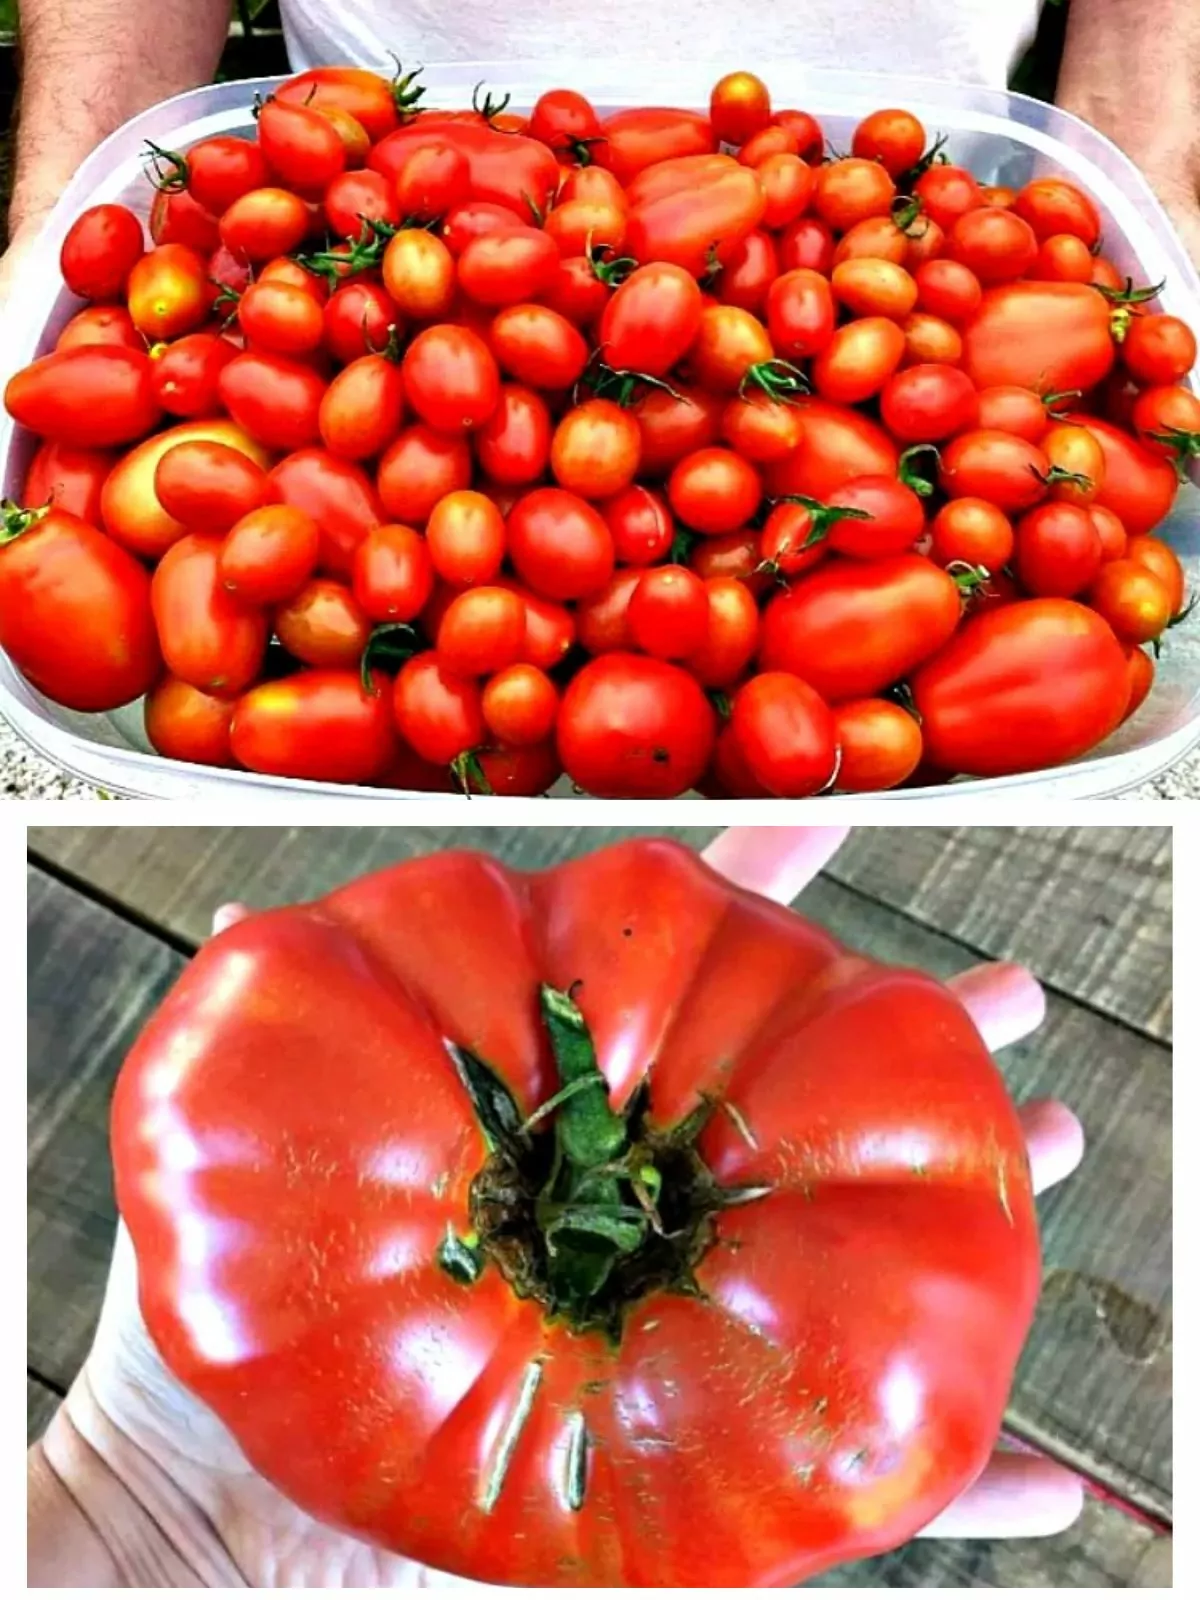 A container overflowing with ripe, red tomatoes freshly picked from a garden.